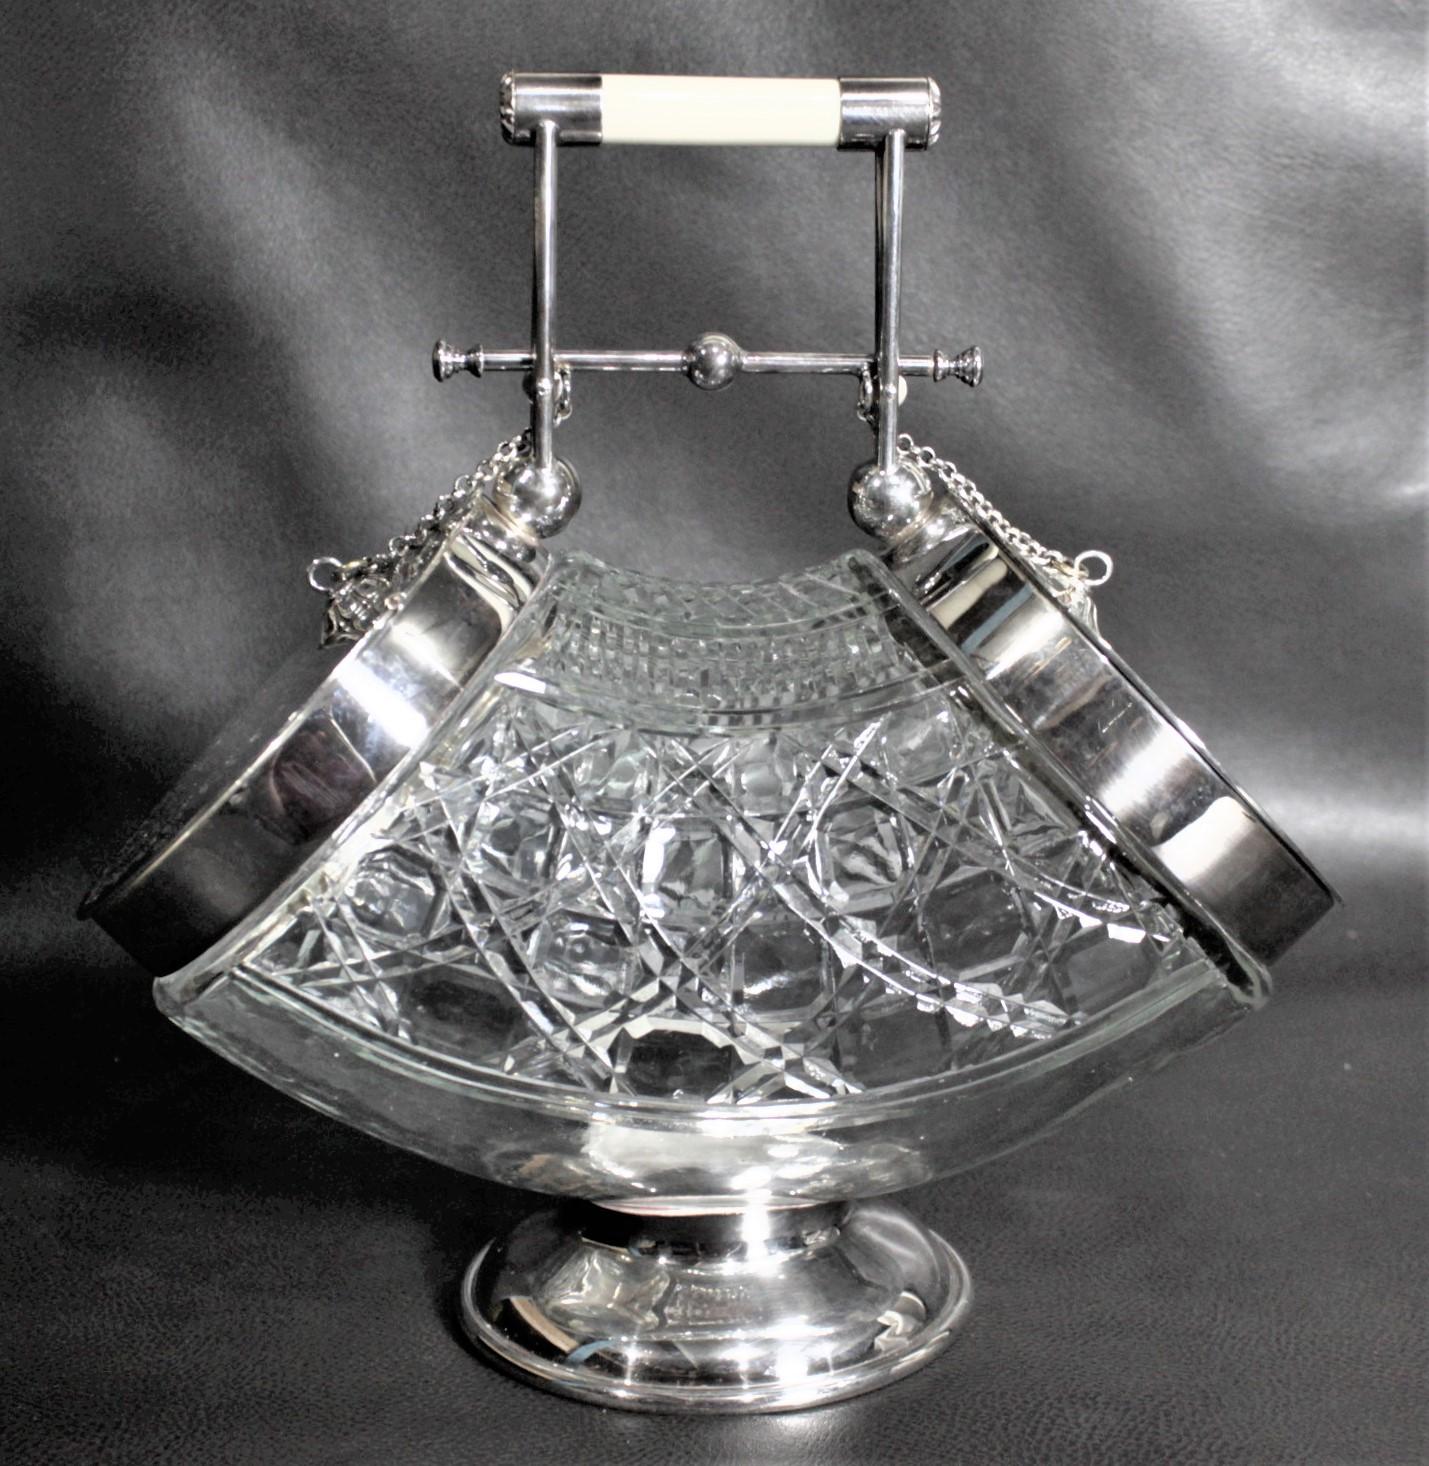 This very unique and impressive silver plated and cut crystal biscuit barrel was made by the Roberts & Dore Ltd. shop in London England in circa 1910 in the period Edwardian style. This biscuit barrel is quire rare in its design as it features a